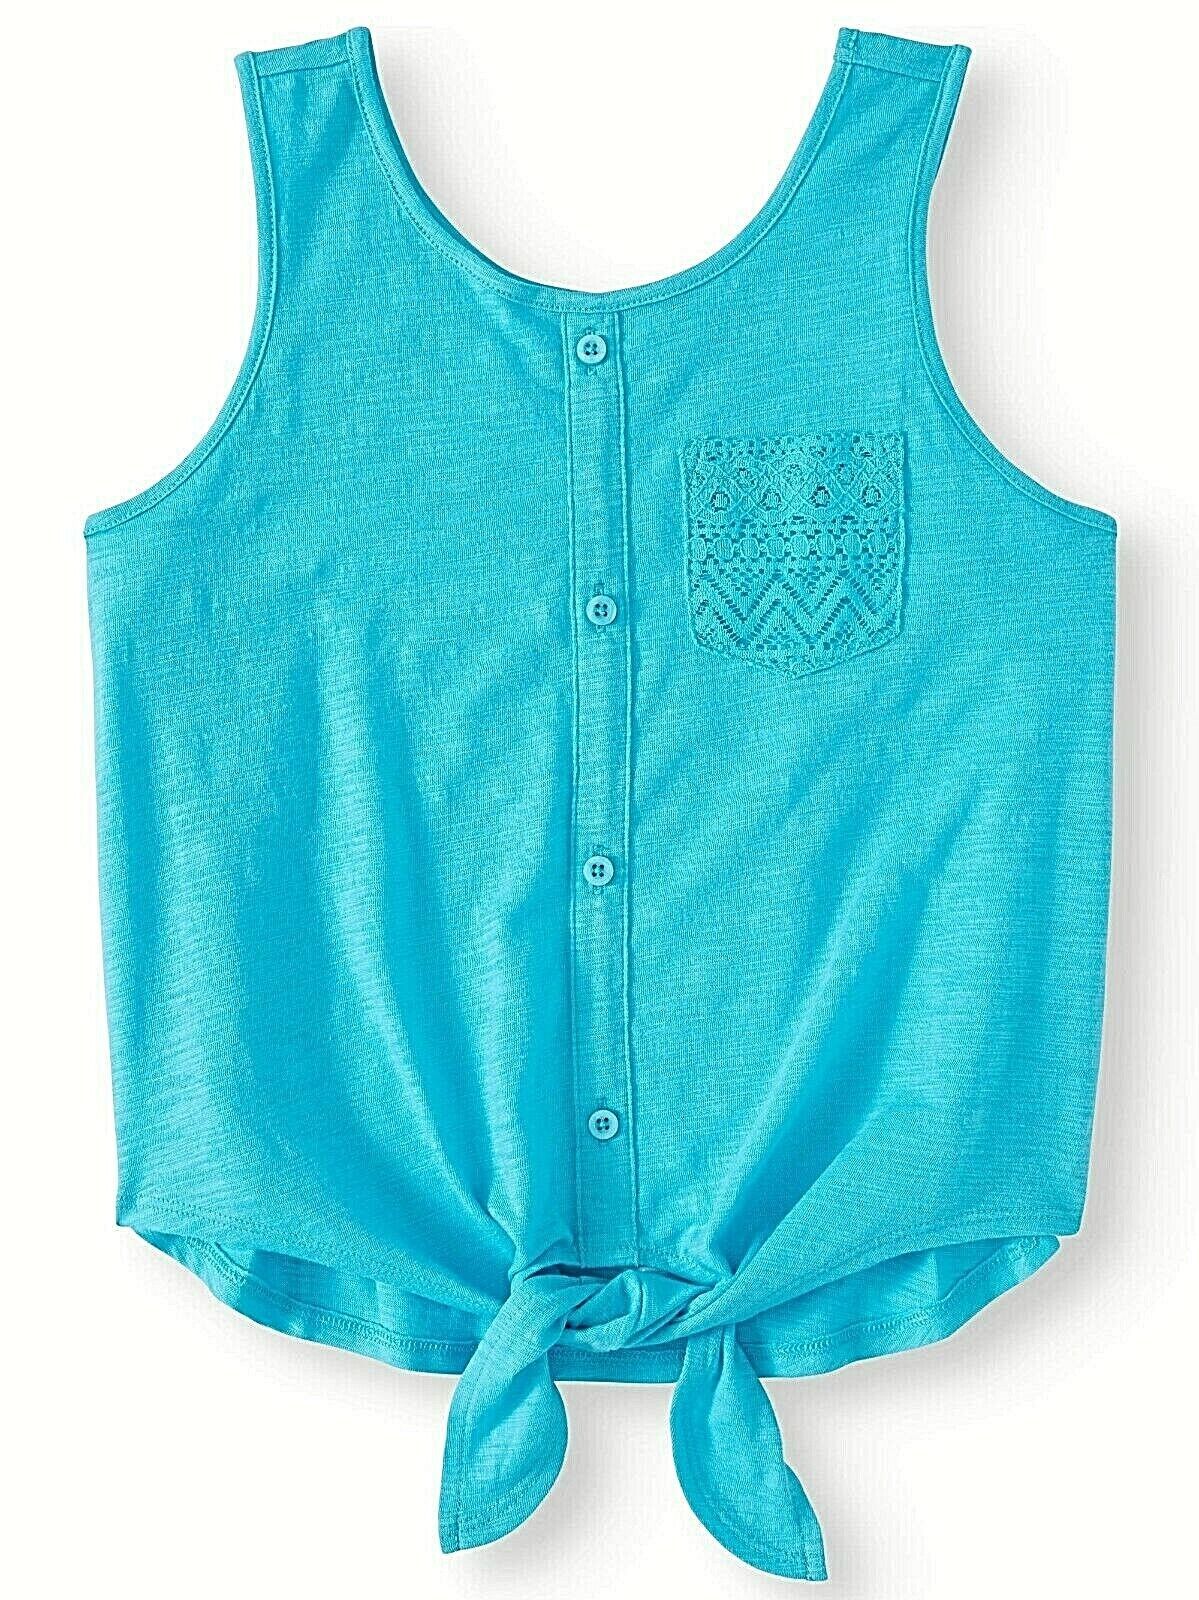 Primary image for Wonder Nation Girls Tie Front Tank Top Pocket Shirt XX-LARGE (18) Neptune Blue